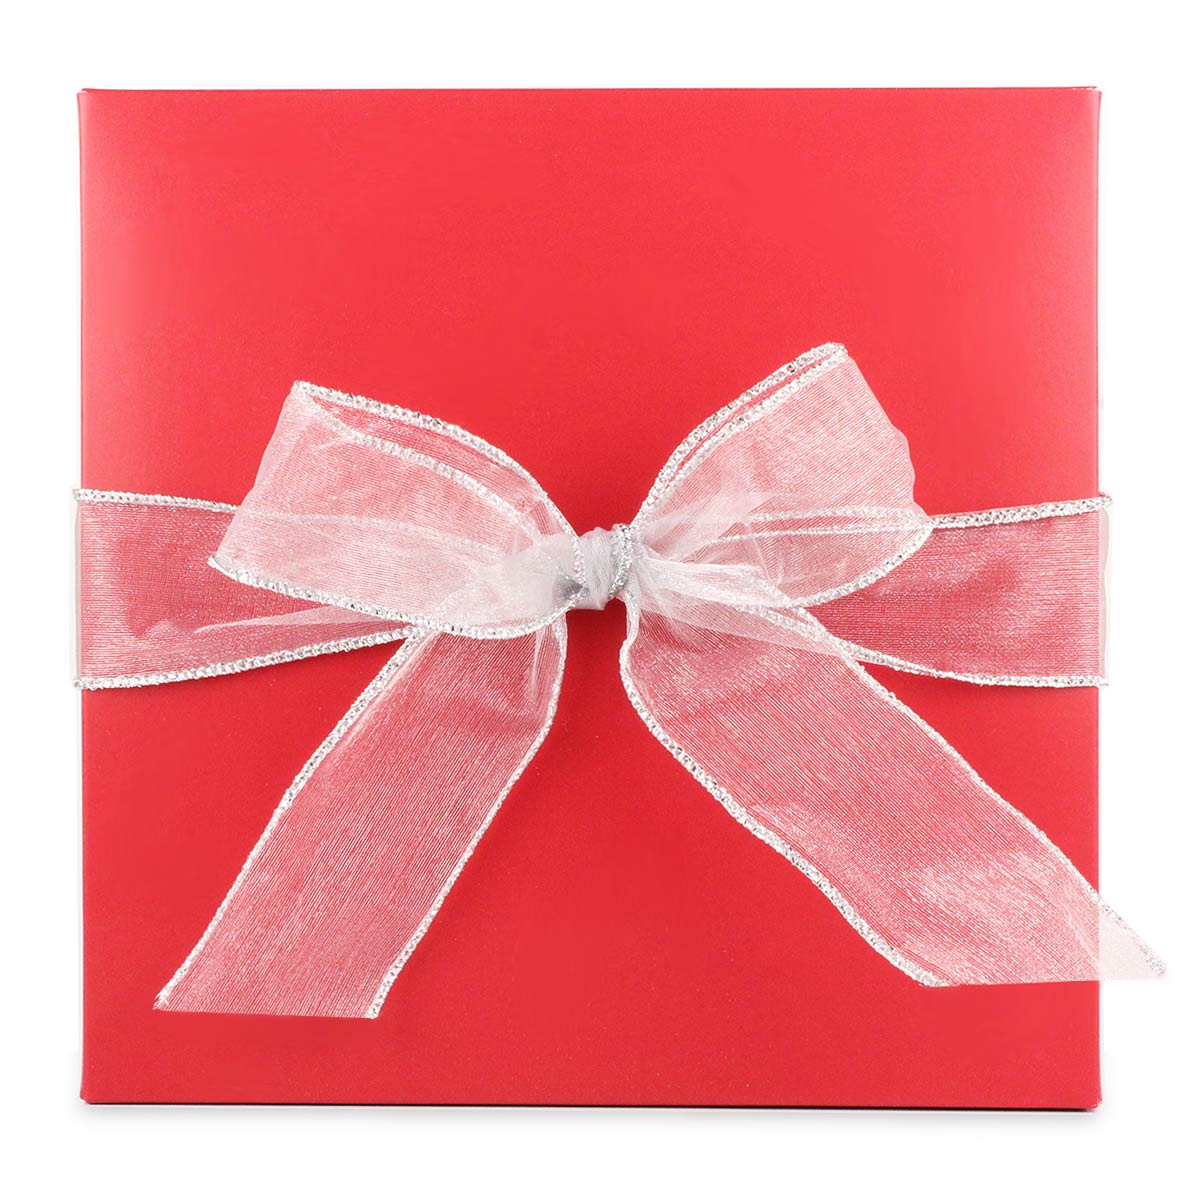 Alternate image of Fine Accoutrements Gift Box